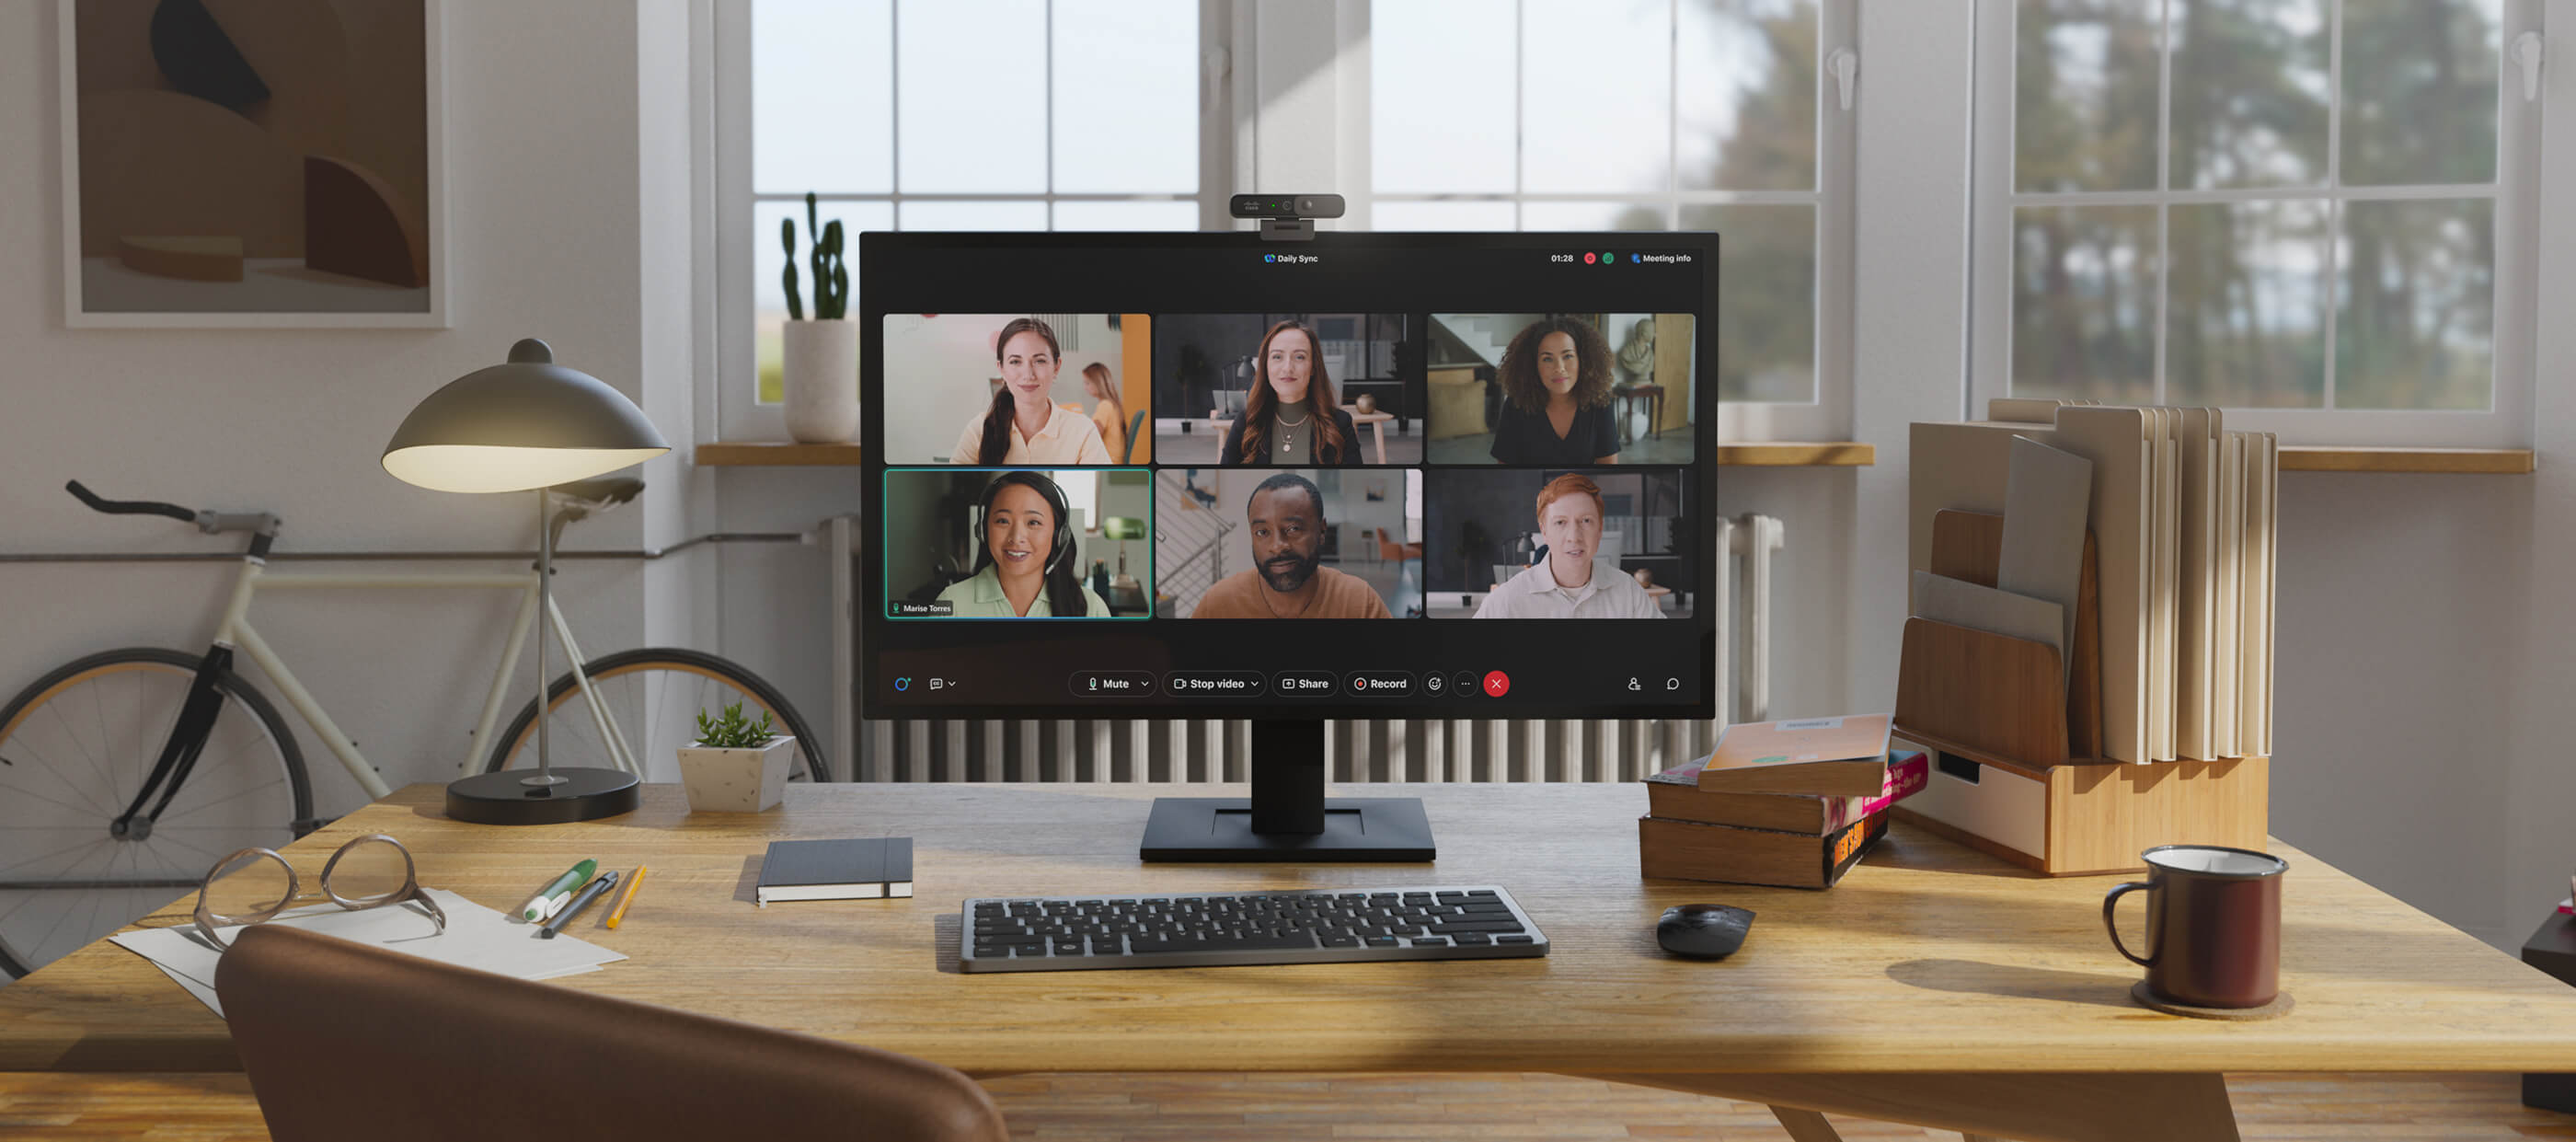 The Desk Camera 1080p on a monitor in a home office. On the monitor screen, six colleagues are having a video meeting.